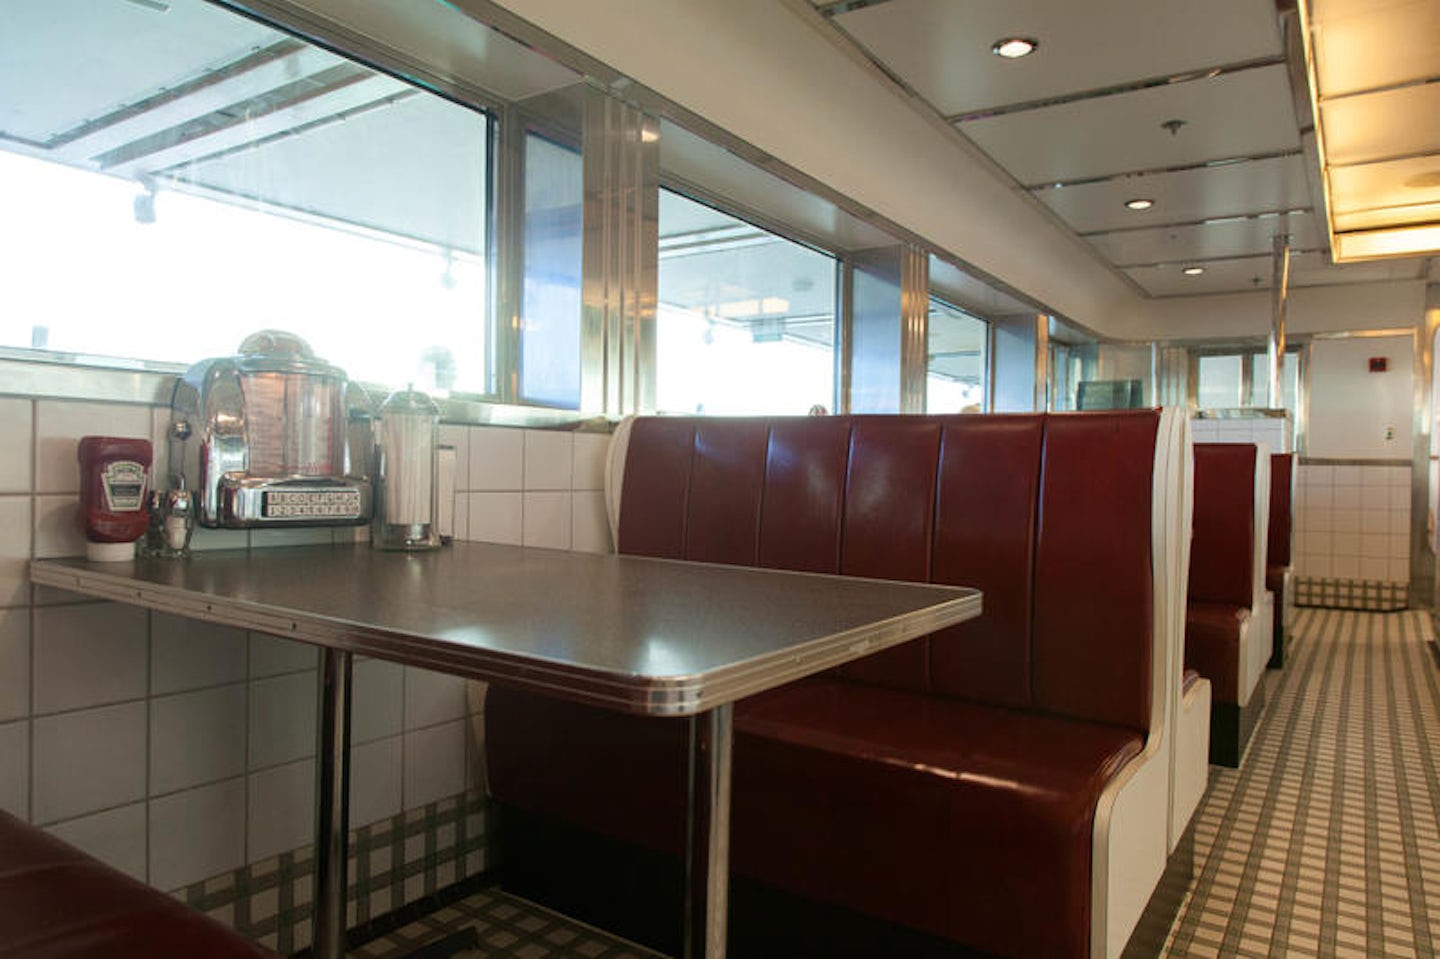 Johnny Rockets on Independence of the Seas